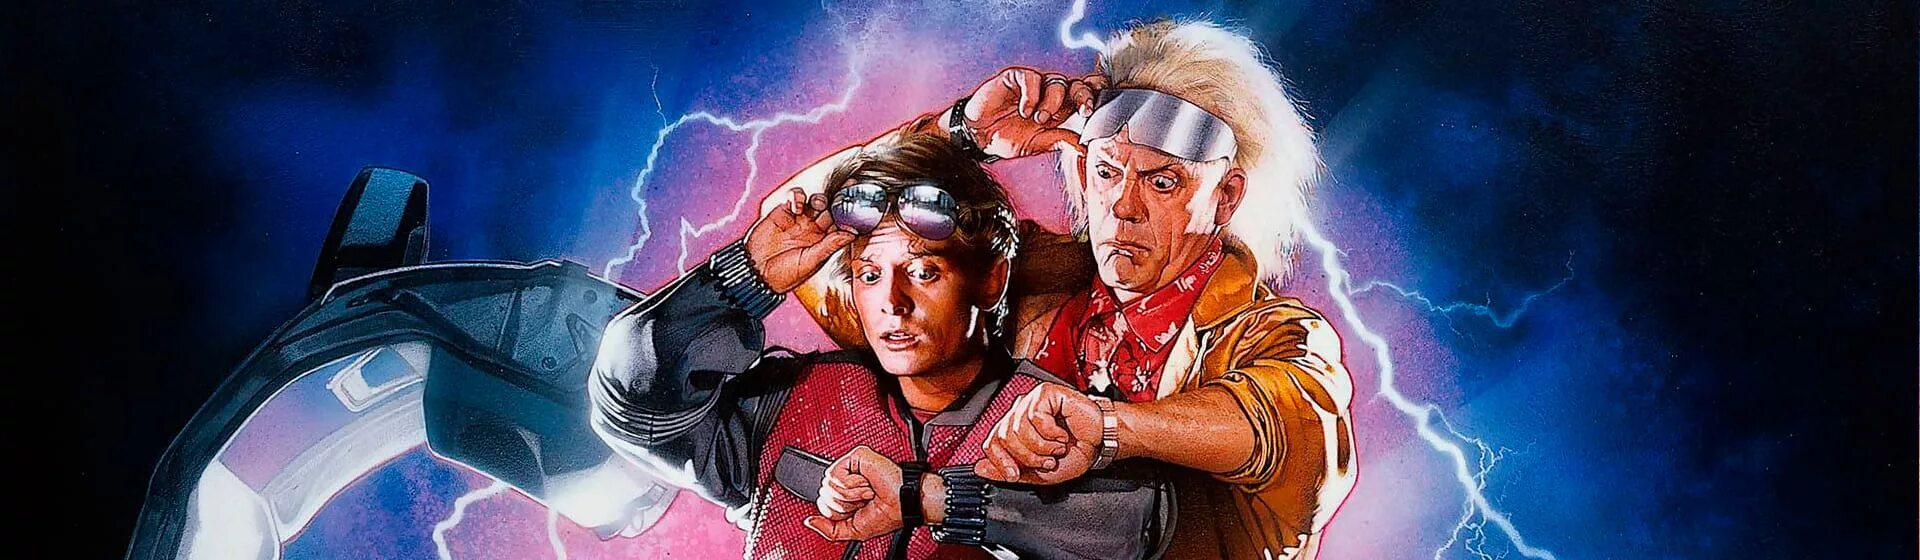 Transcending the future with. Назад в будущее back to the Future 1985. Назад в будущее 2 (1989) back to the Future Part II. Назад в будущее обои.